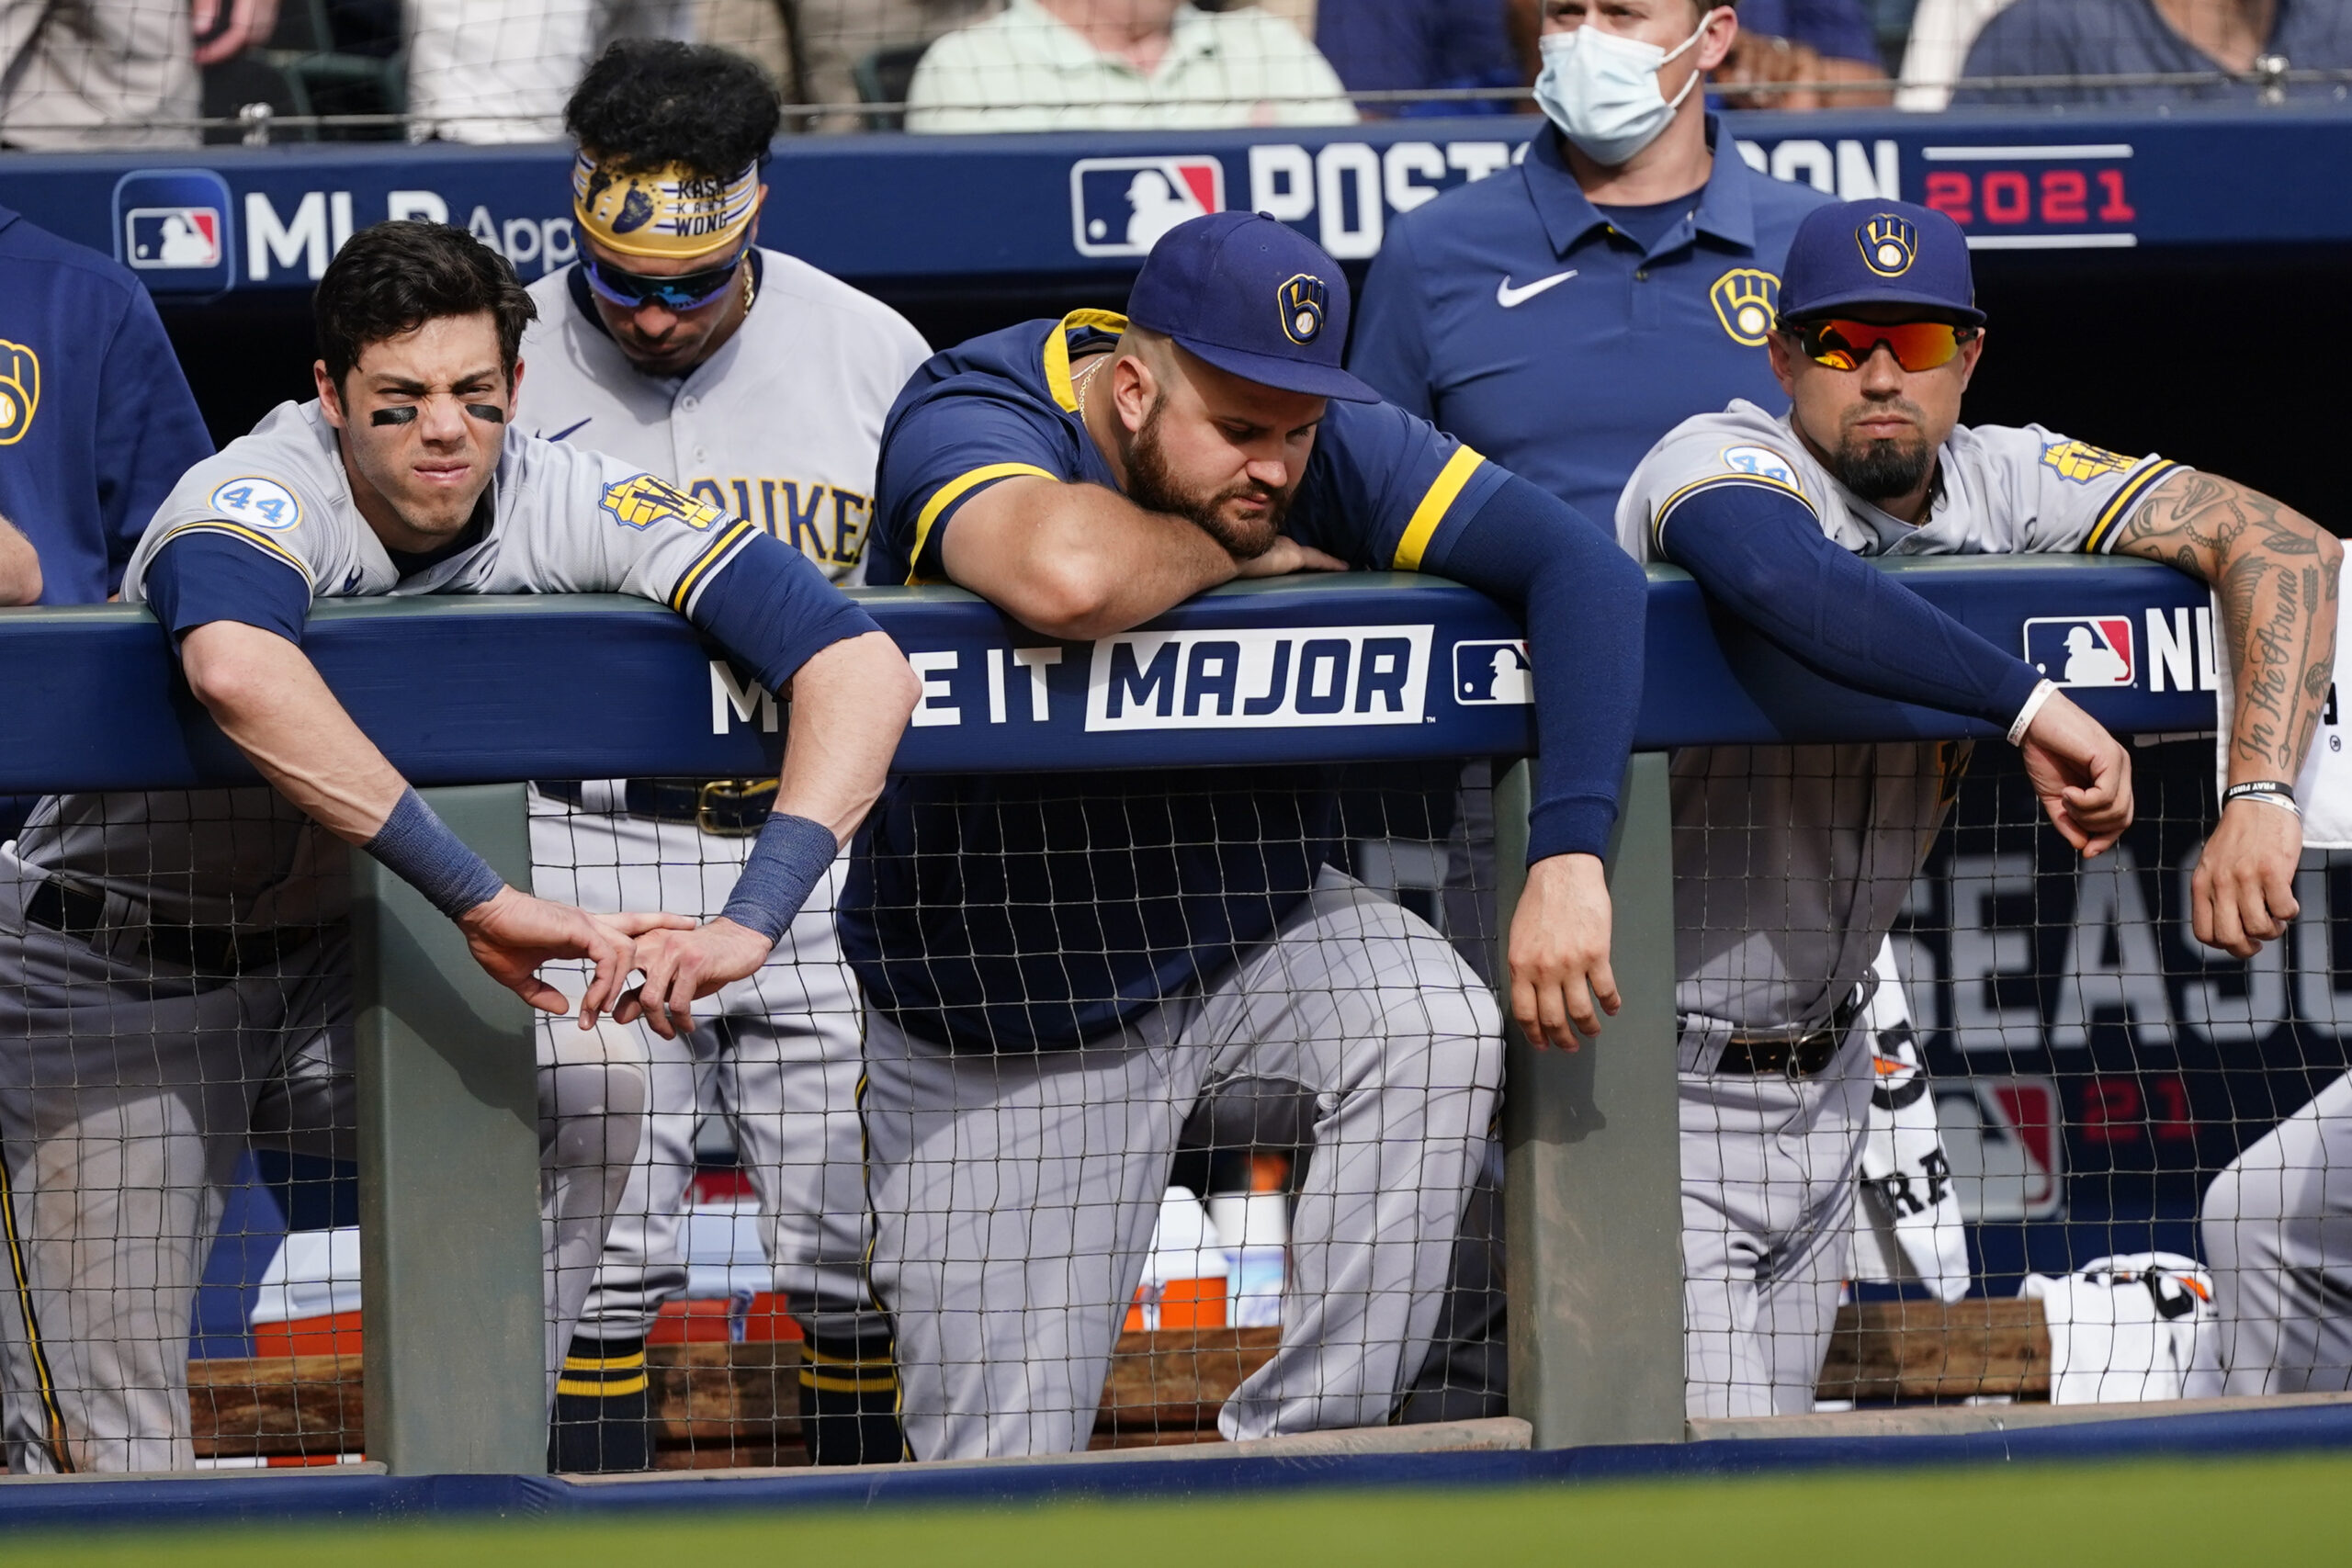 Brewers players watch game from dugout